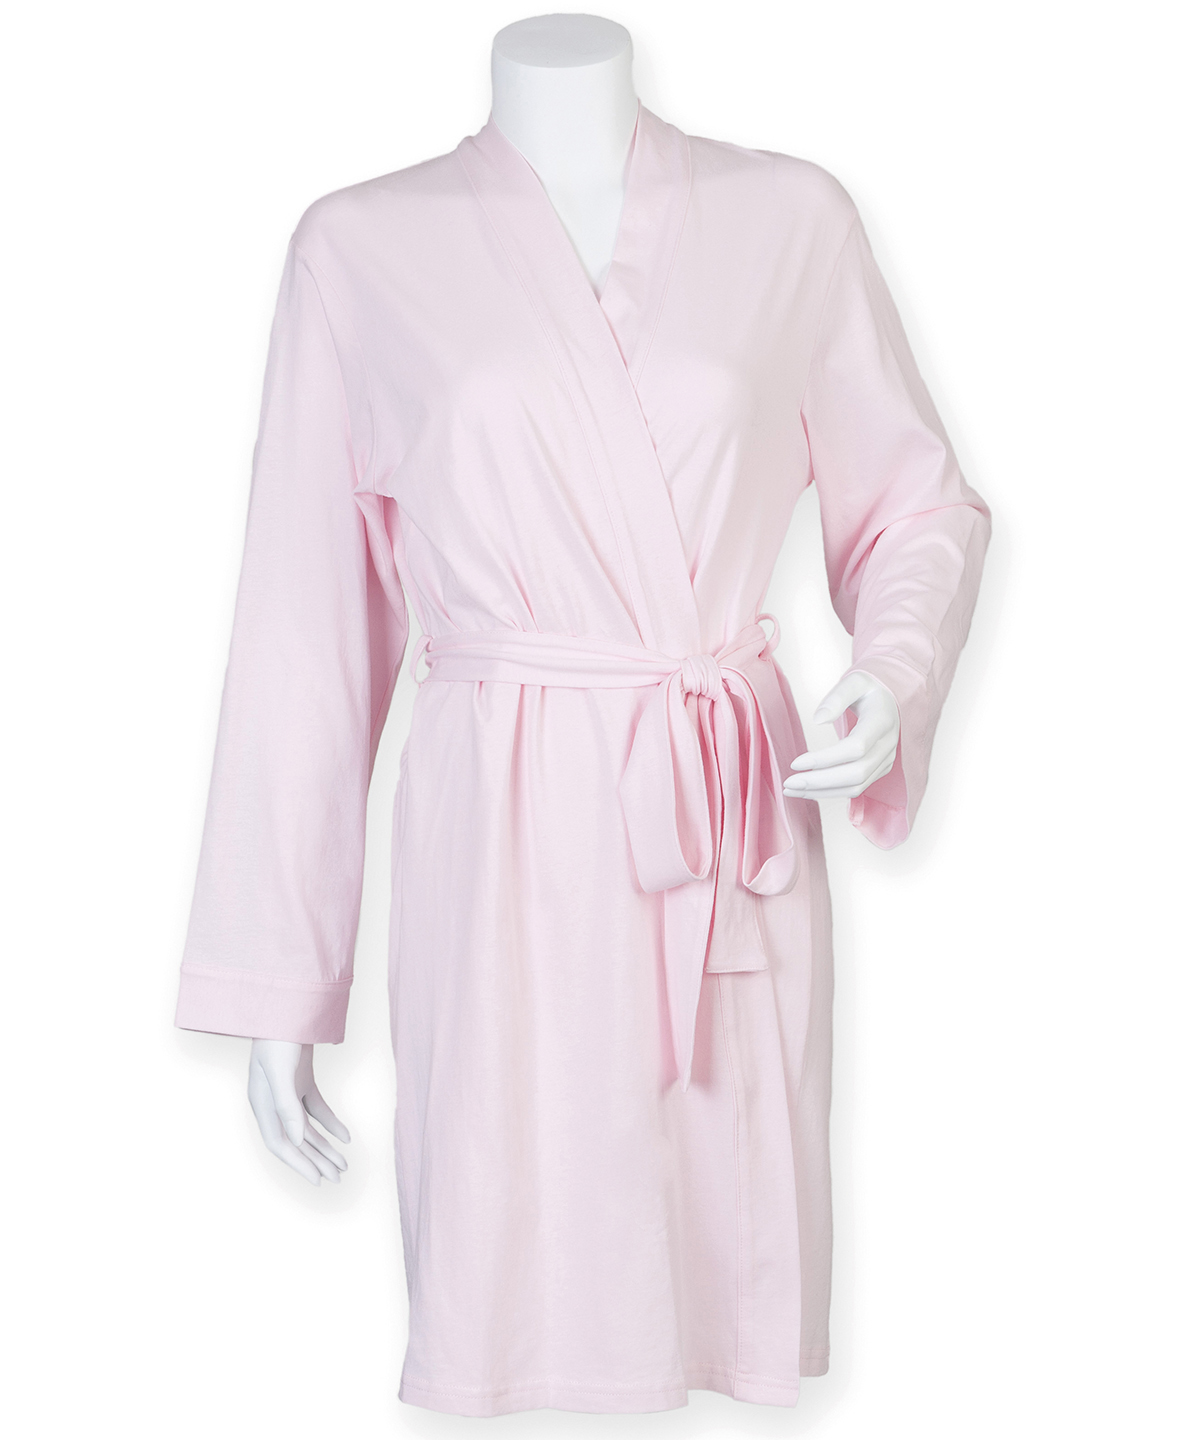 TC050 - Women's wrap robe - Absolute PPE Industrial